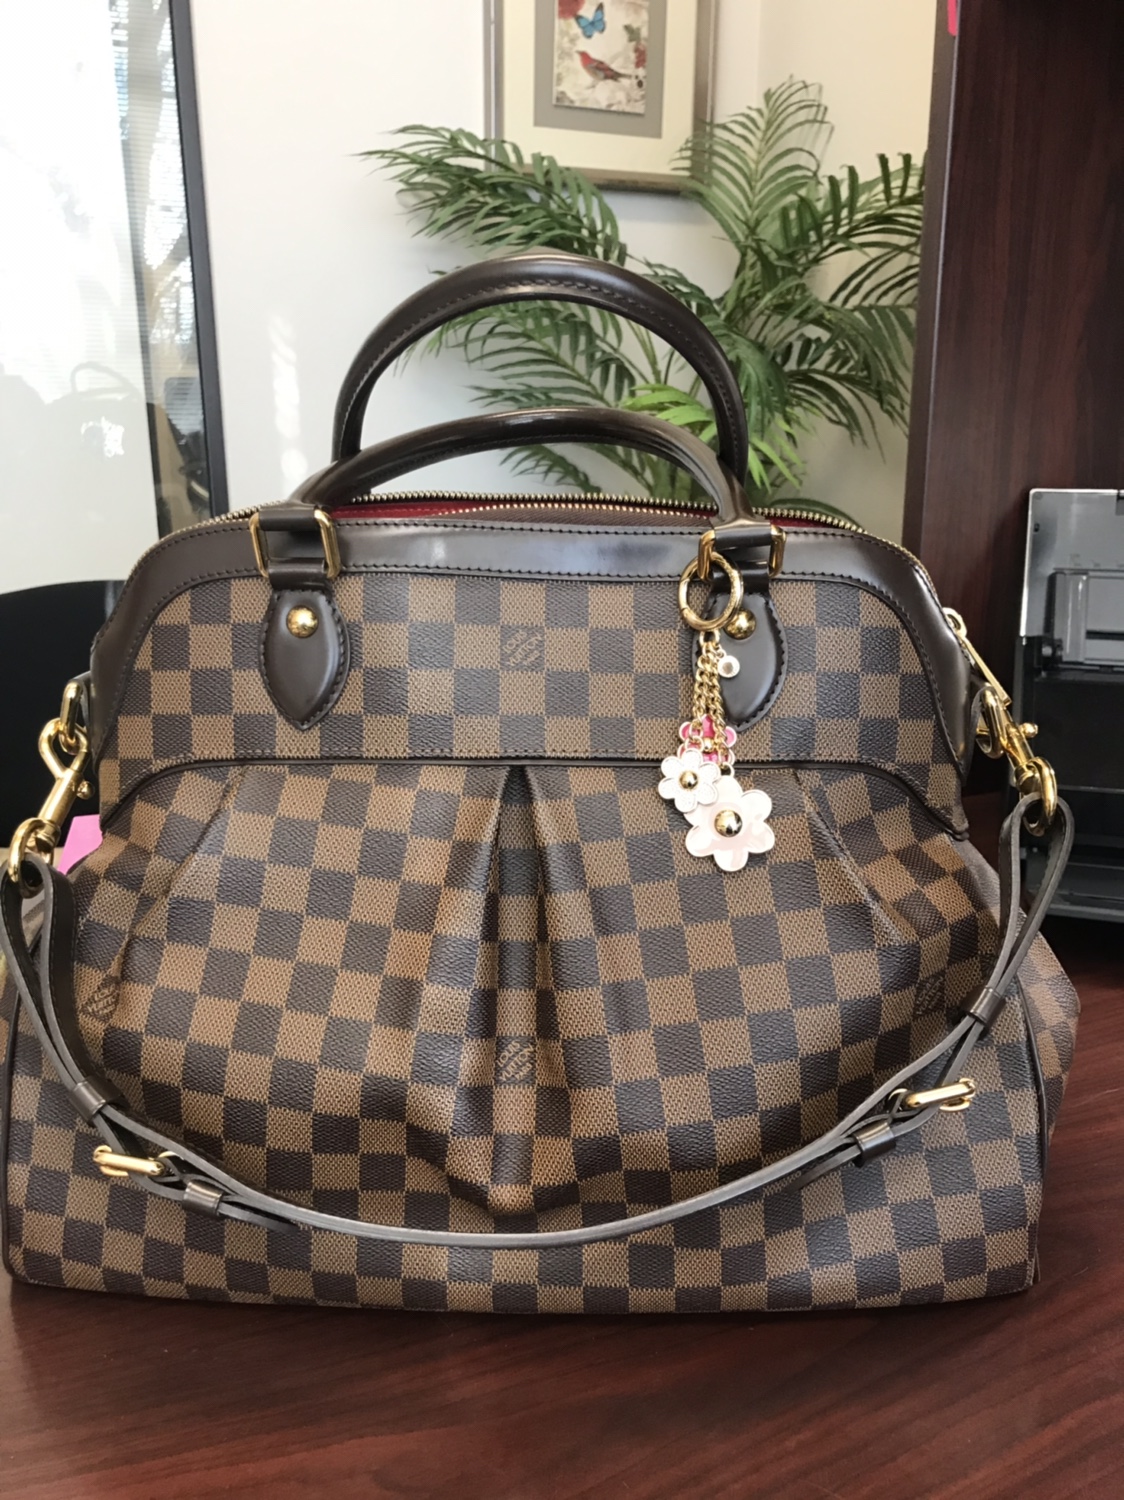 Pics of your Louis Vuitton in action | Page 1011 - PurseForum